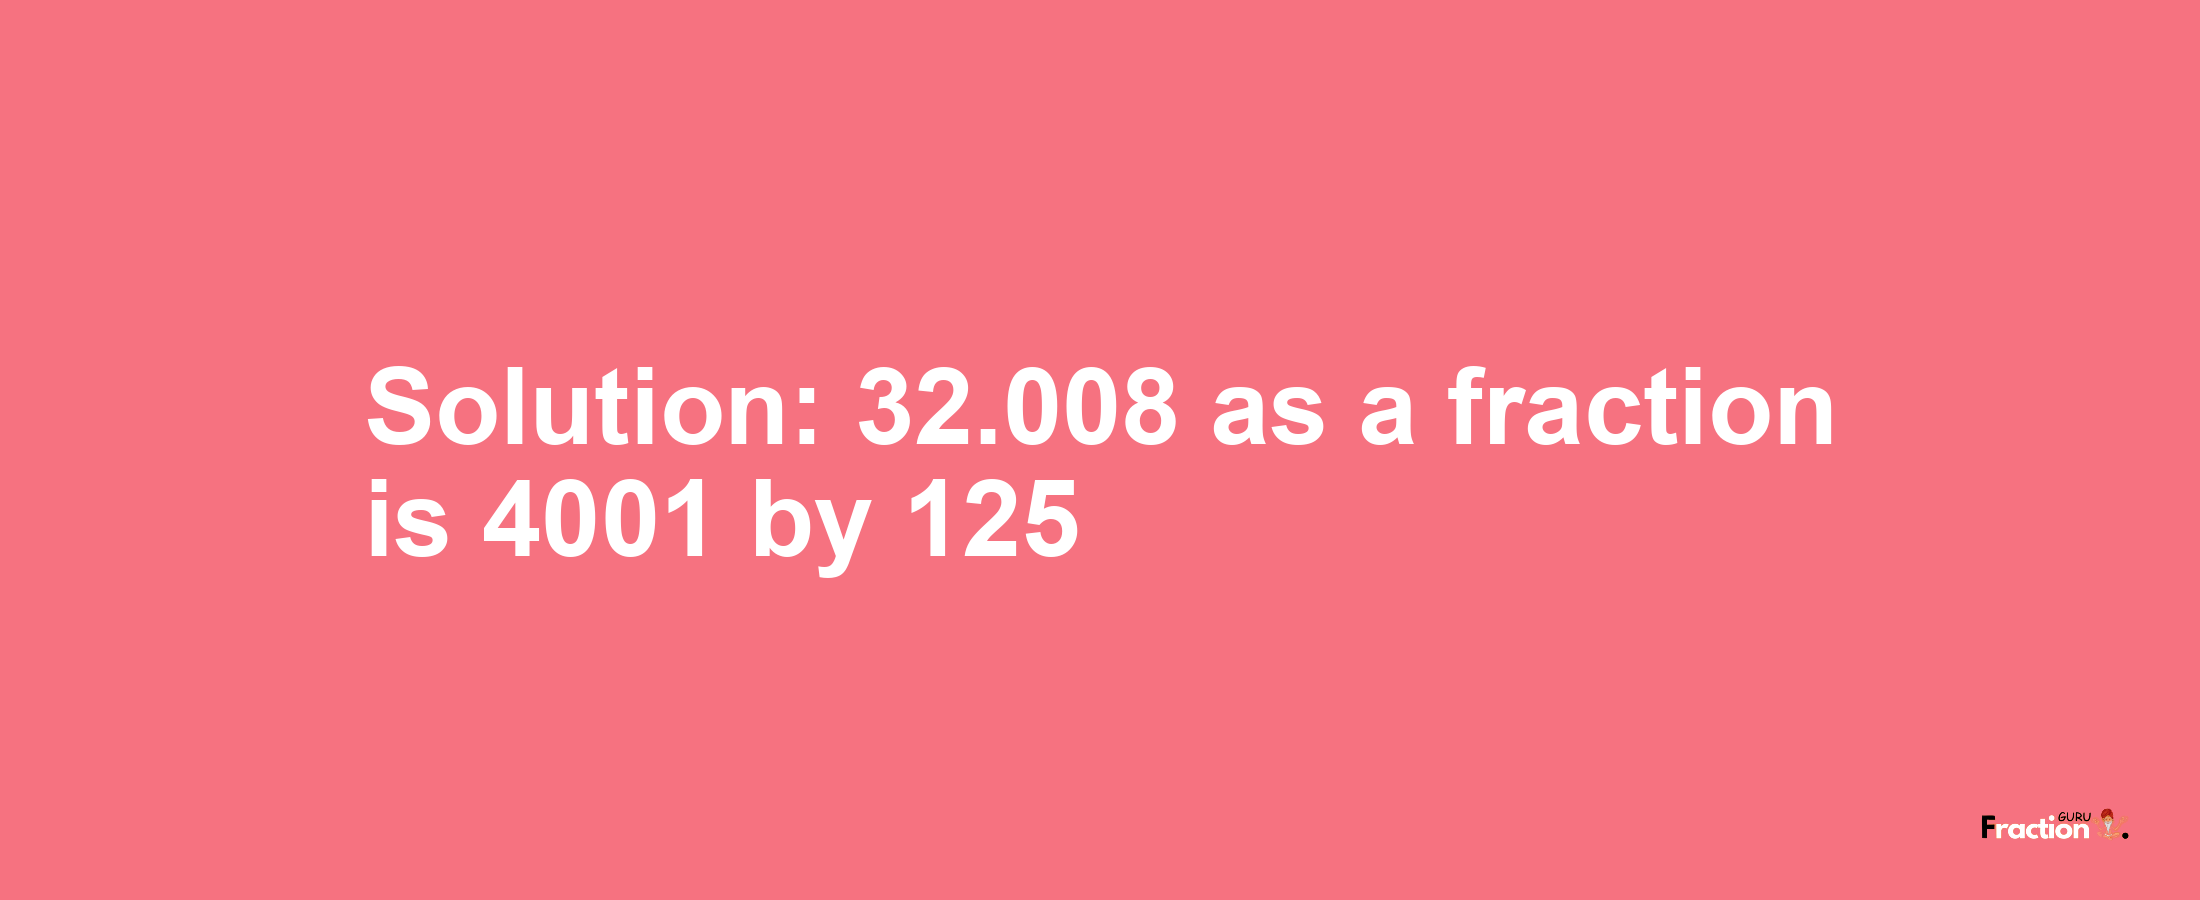 Solution:32.008 as a fraction is 4001/125